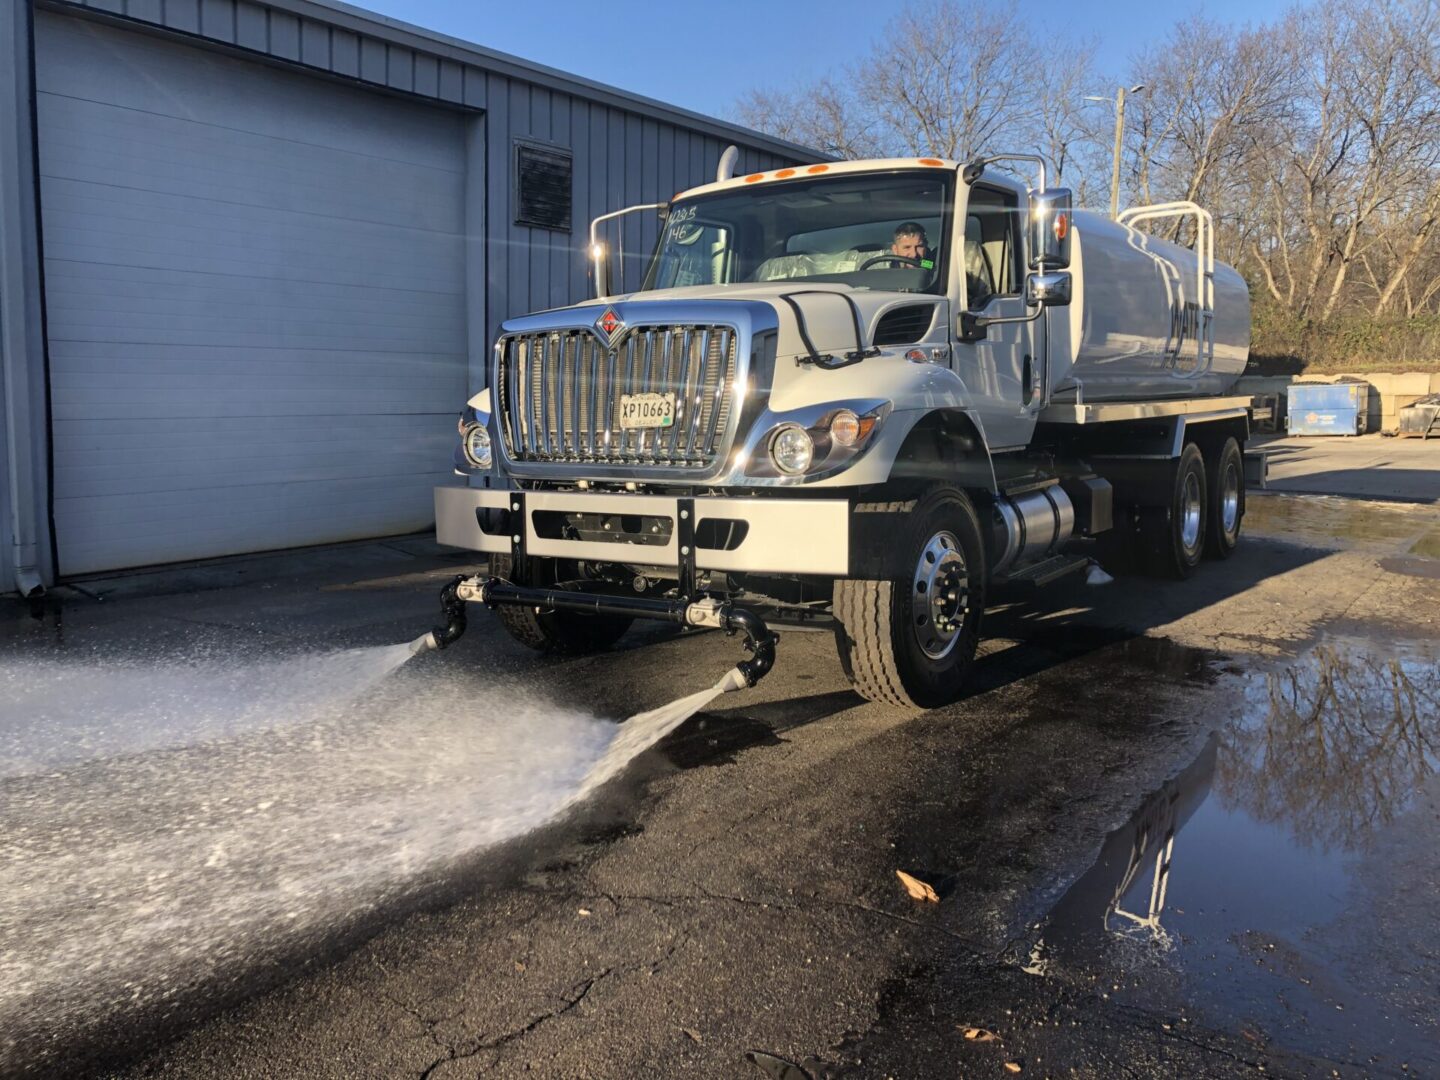 A truck is spraying water on the street.